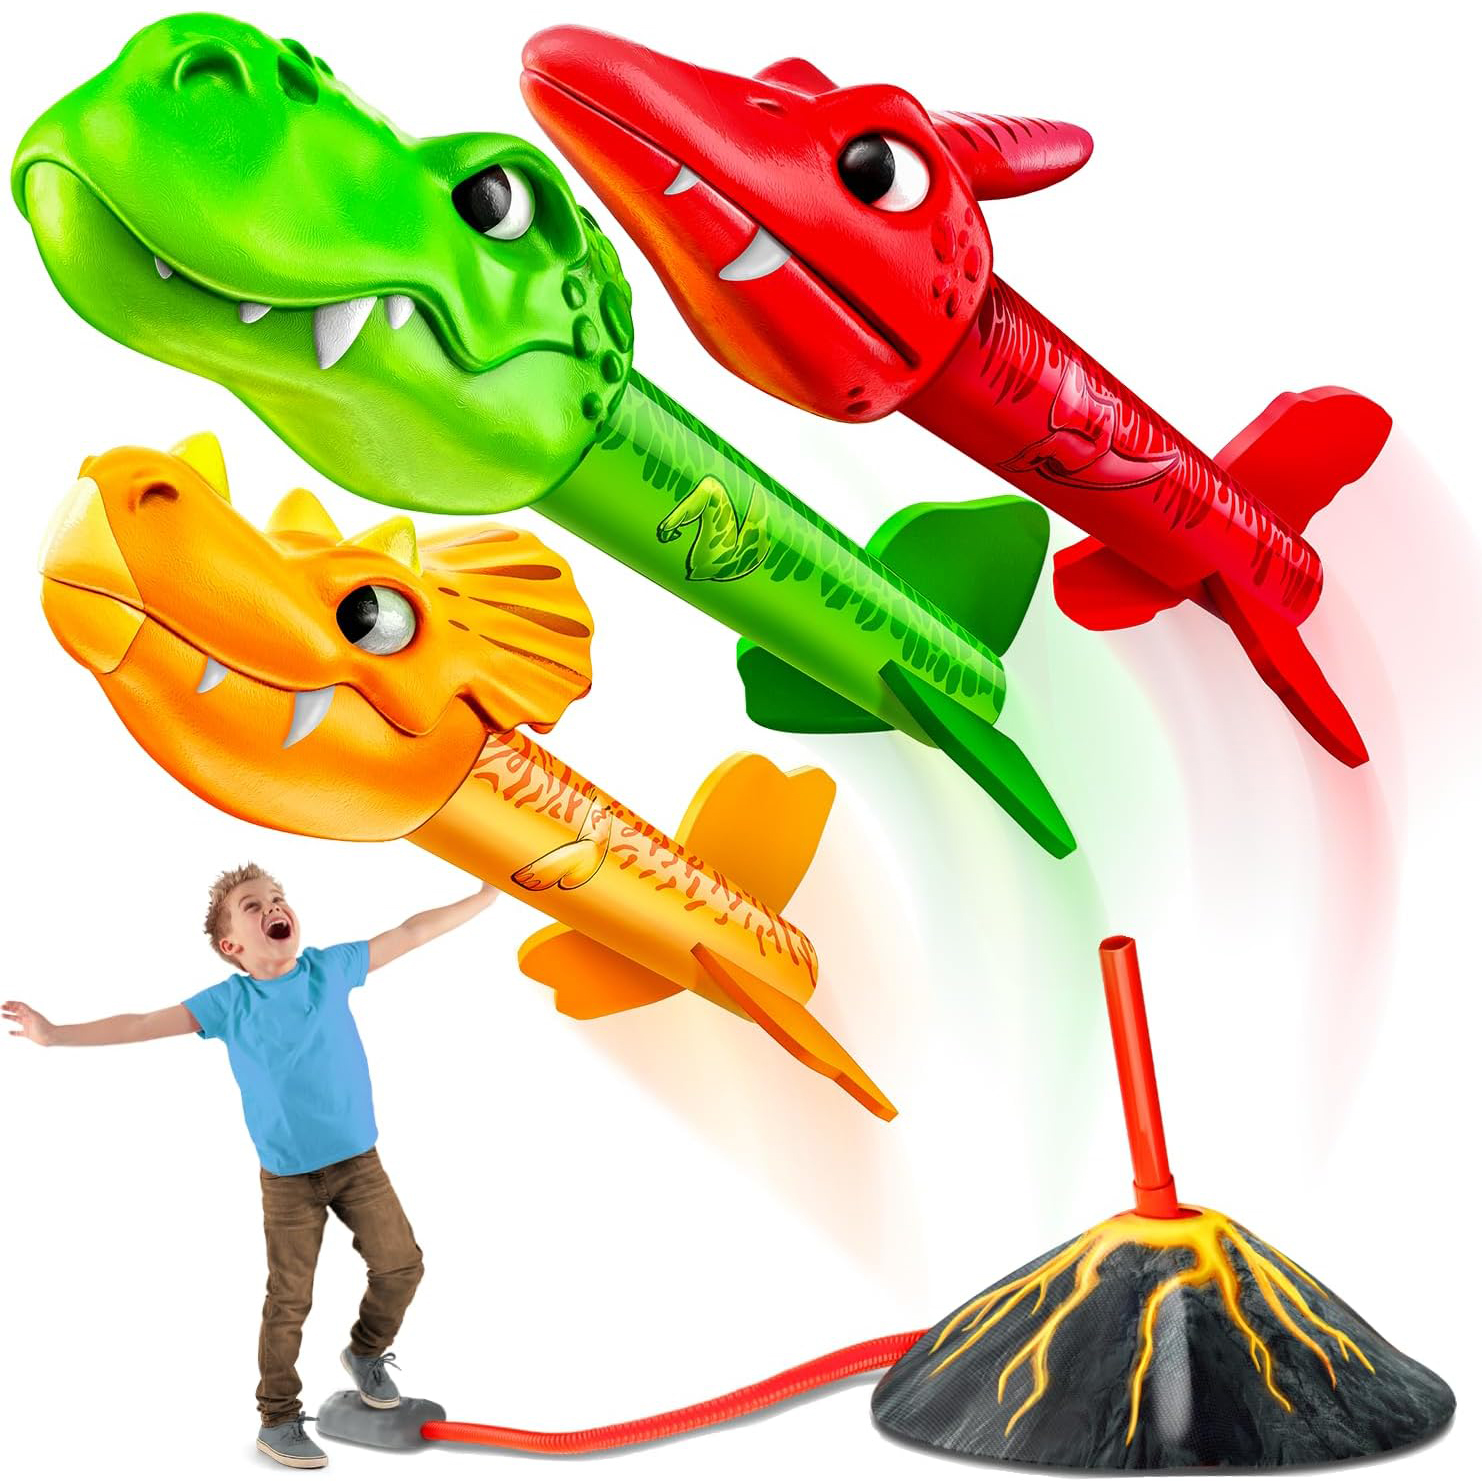 fun outdoor toys for kids - rocket launch